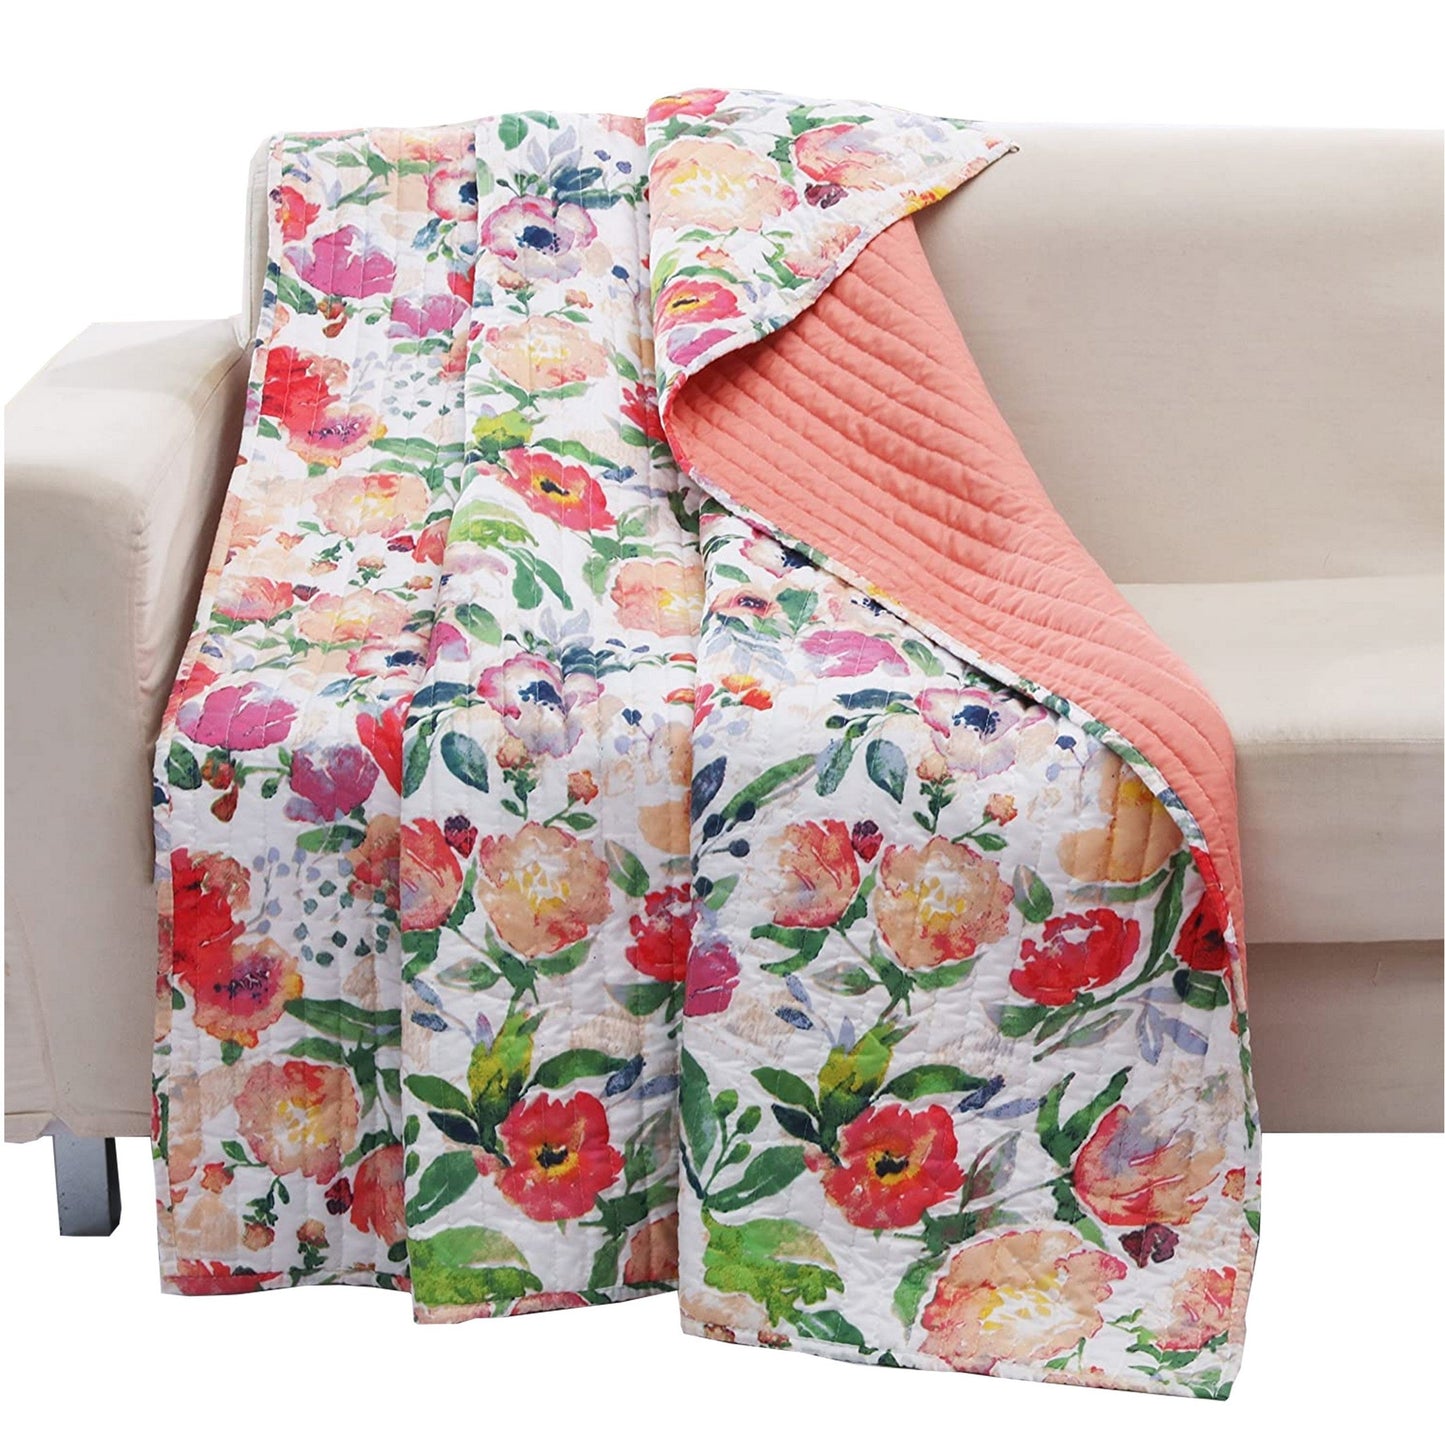 60 x 50 Inches Microfiber Quilted Throw with Floral Print Multicolor By Casagear Home BM218739